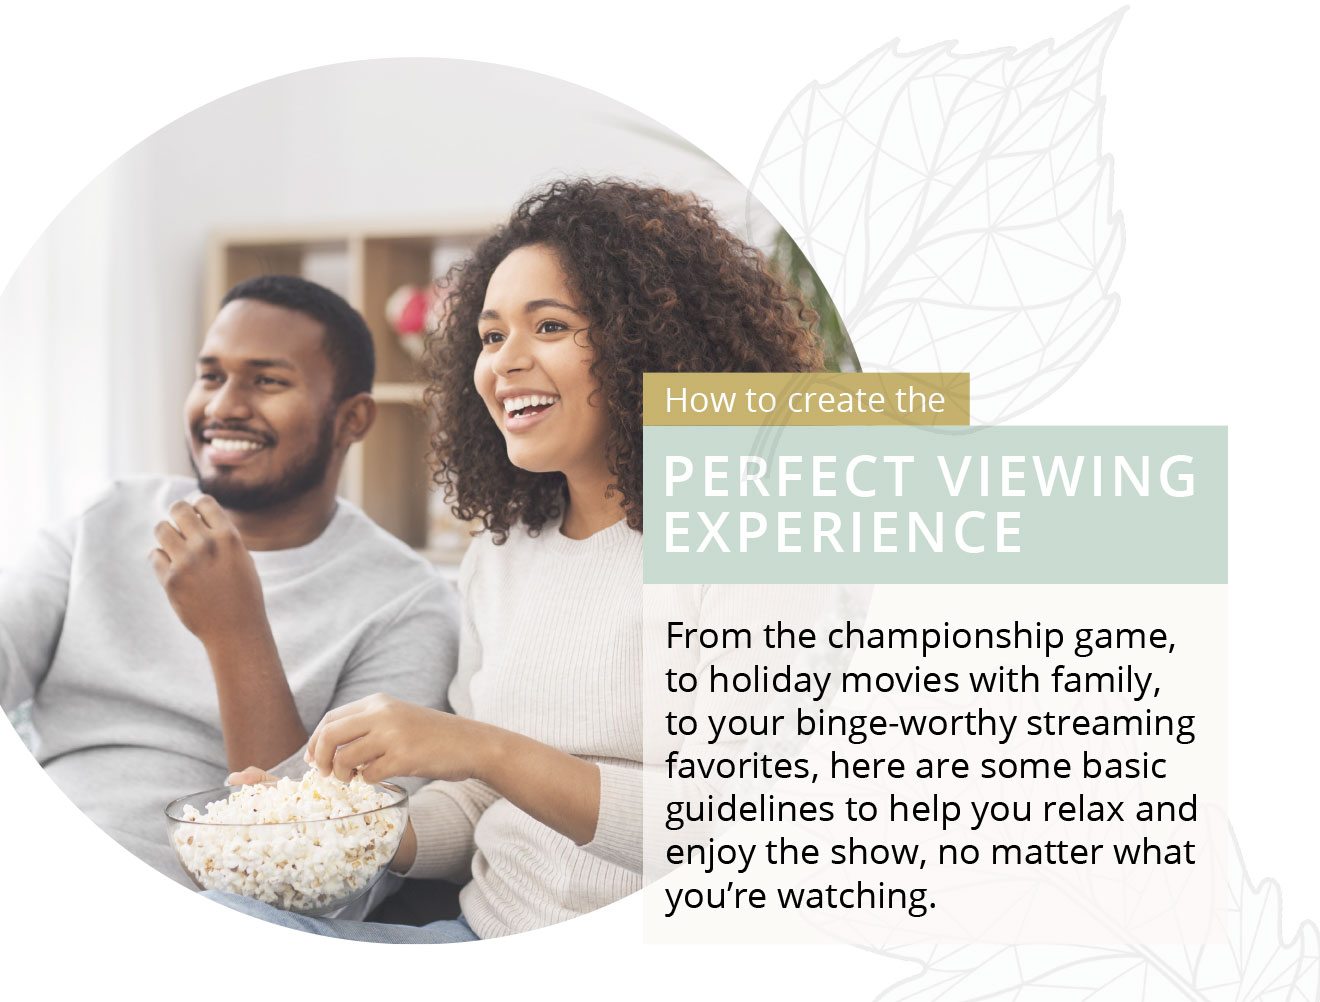 How to create the PERFECT VIEWING EXPERIENCE | From the championship game, to holiday movies with family, to your binge-worthy streaming favorites, here are some basic guidelines to help you relax and enjoy the show, no matter what you’re watching.